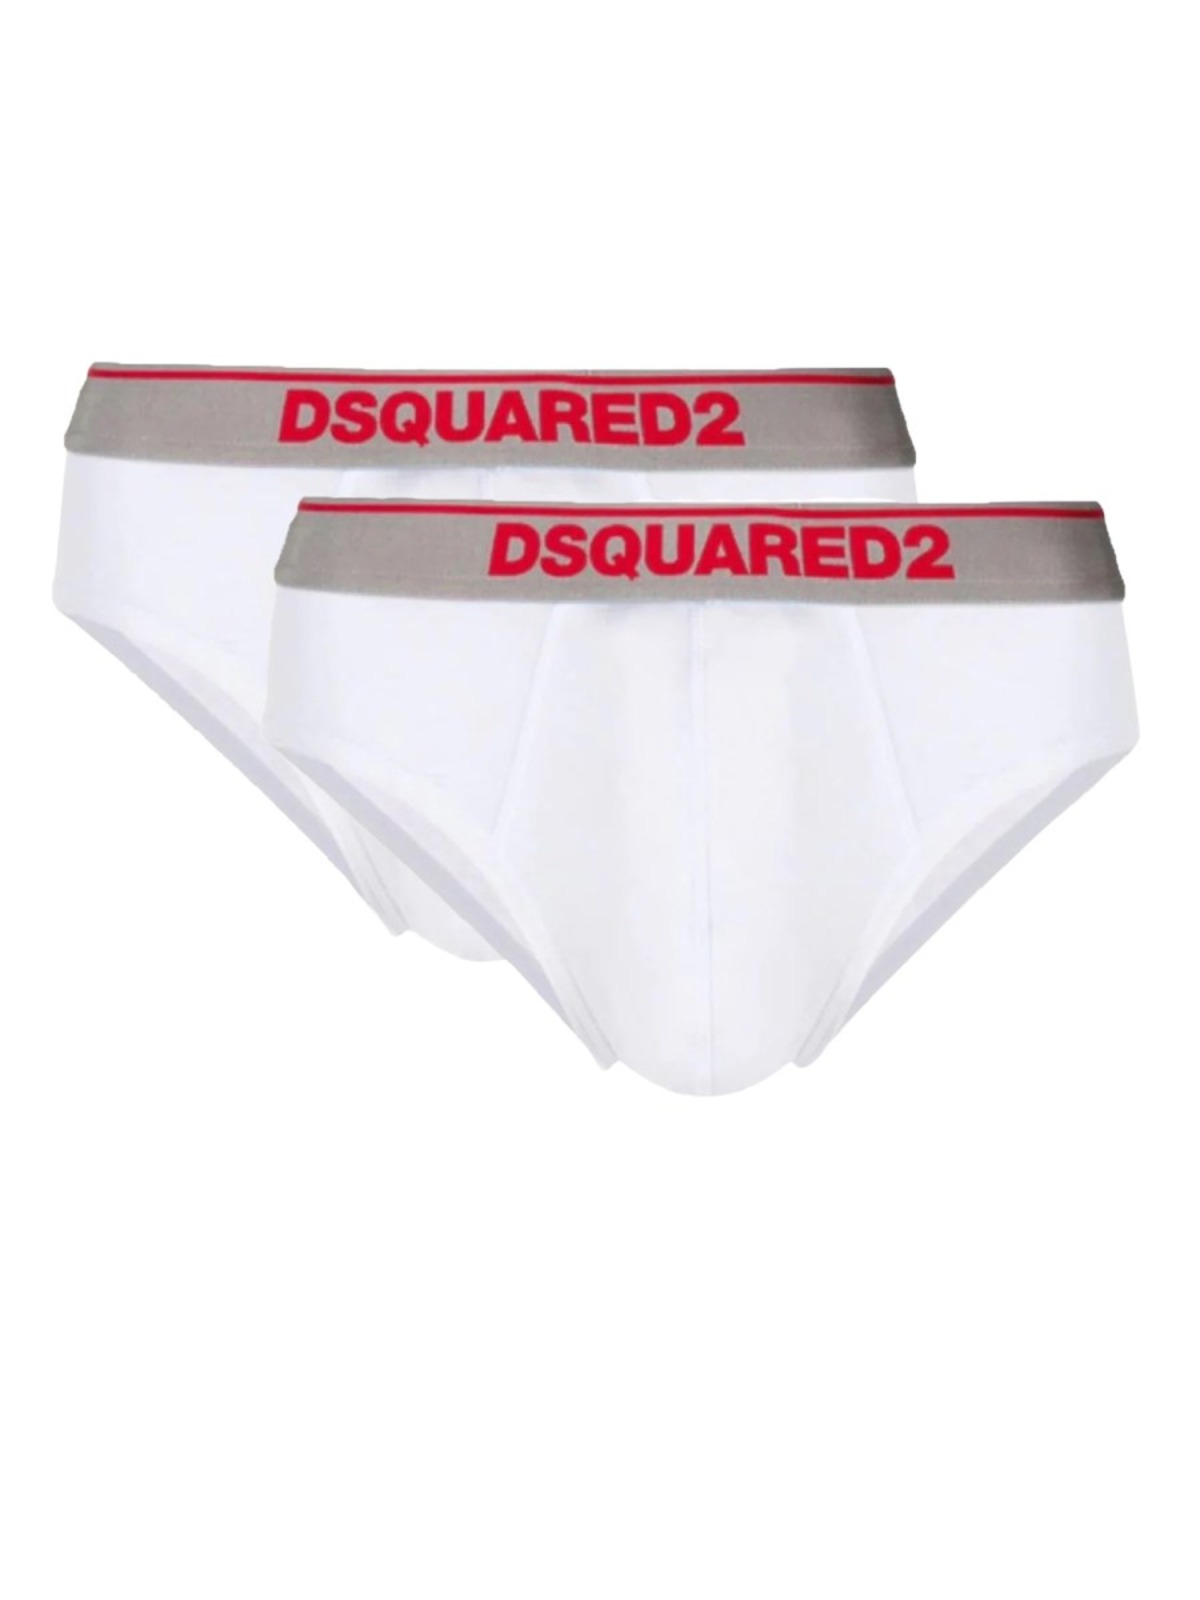 DSQUARED PACK OF TWO LOGO BRIEFS DCX610050_100 12719 | BASE百貨店